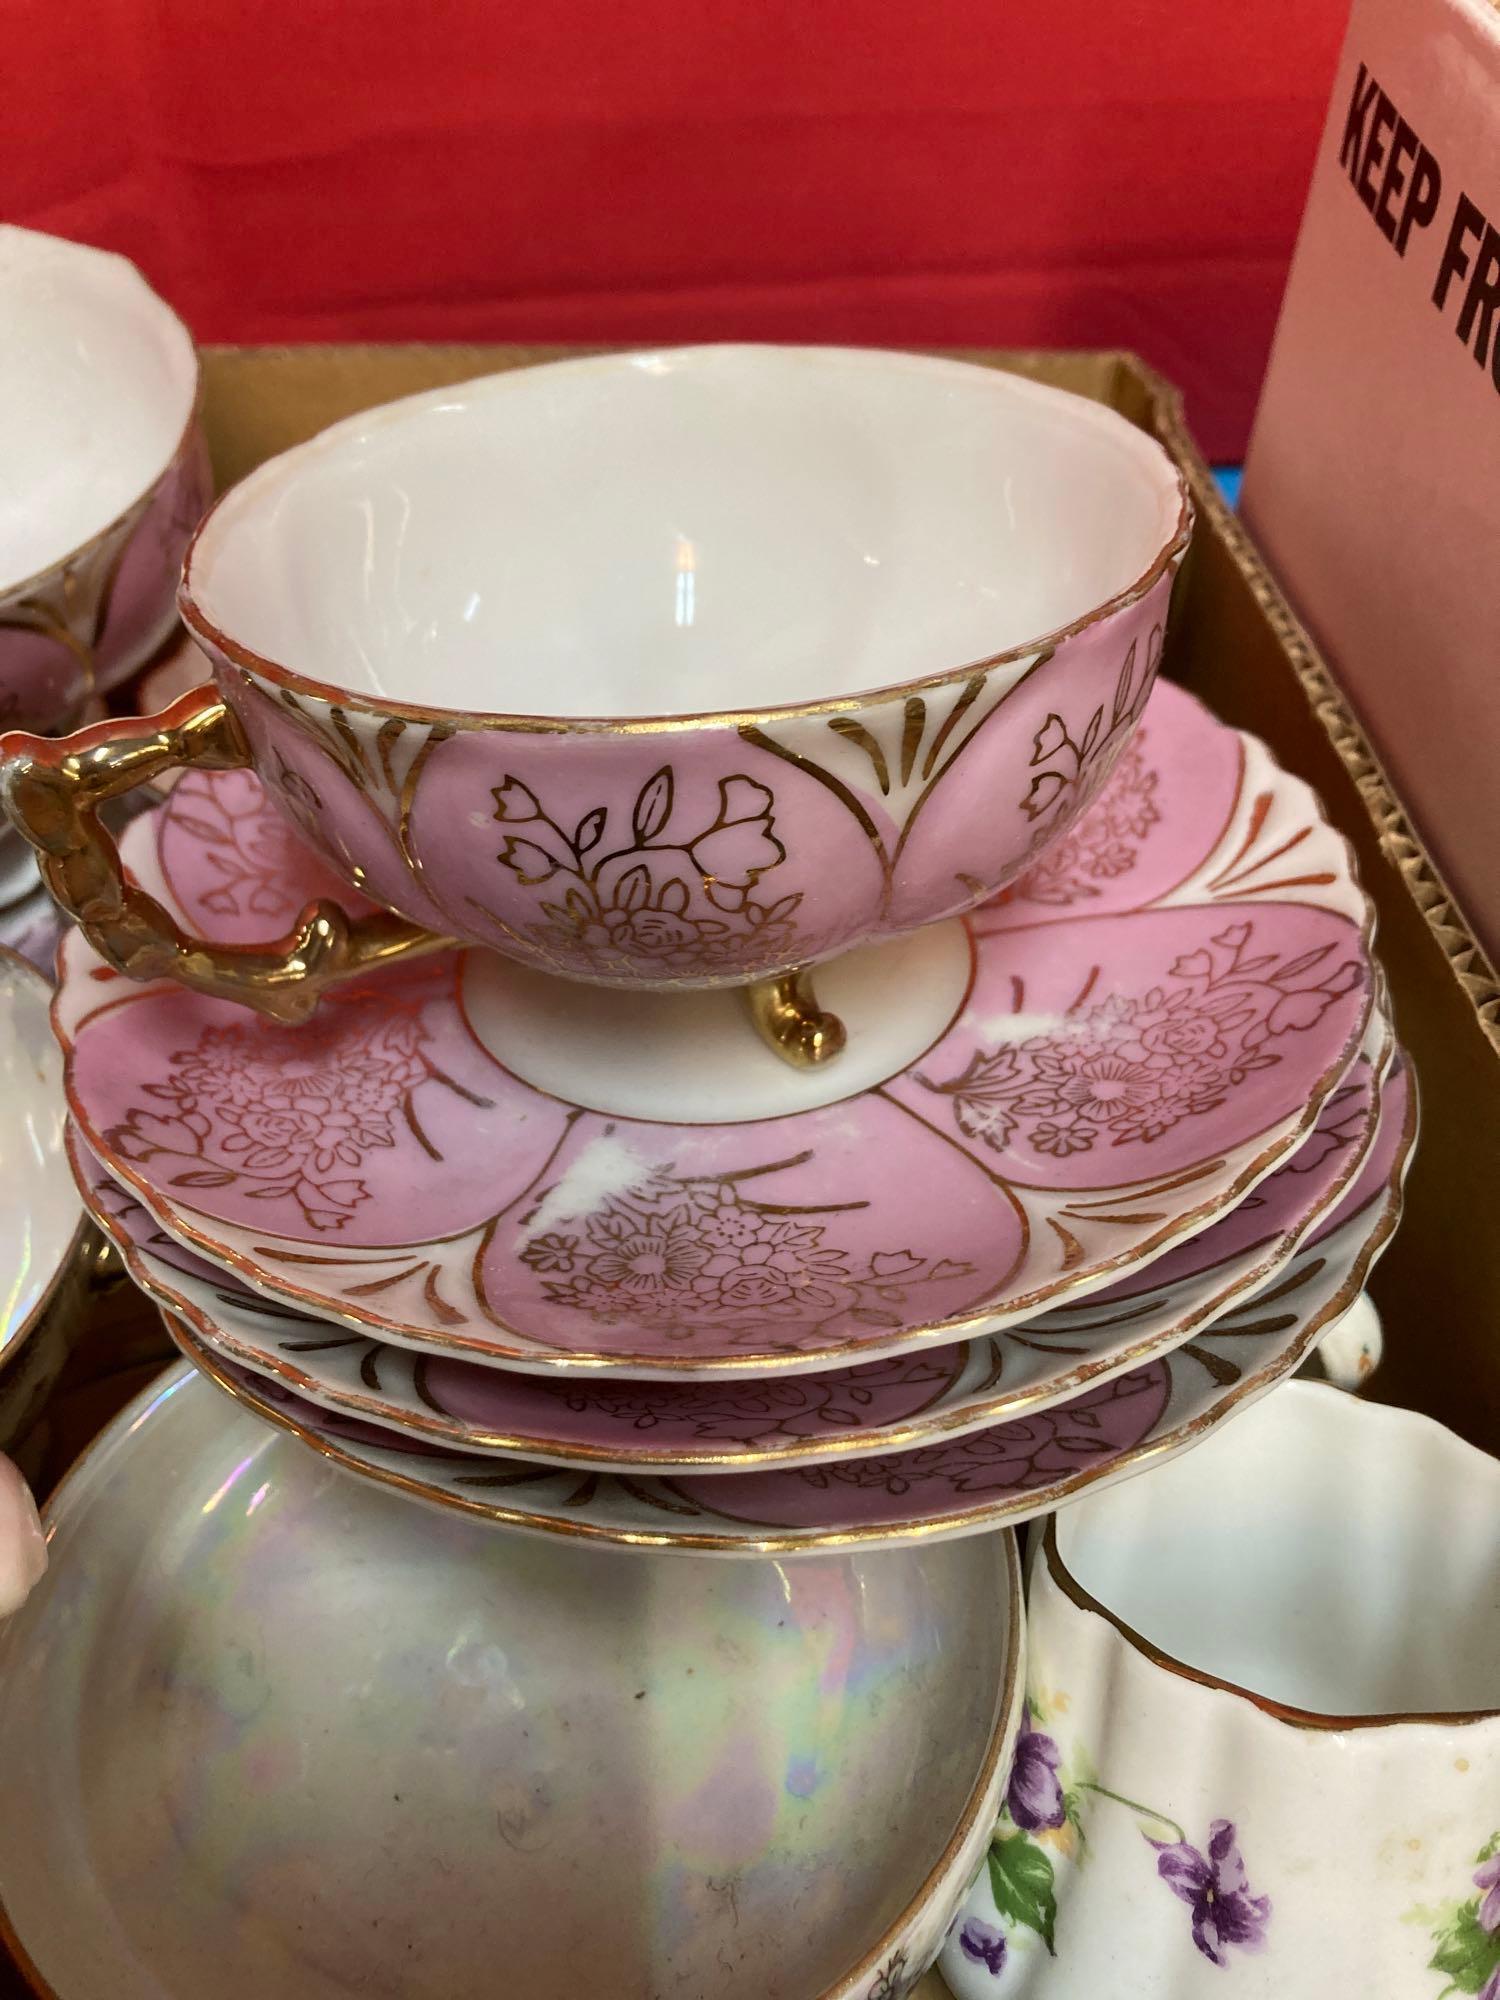 Vintage China, including cups and saucers, plates, and more